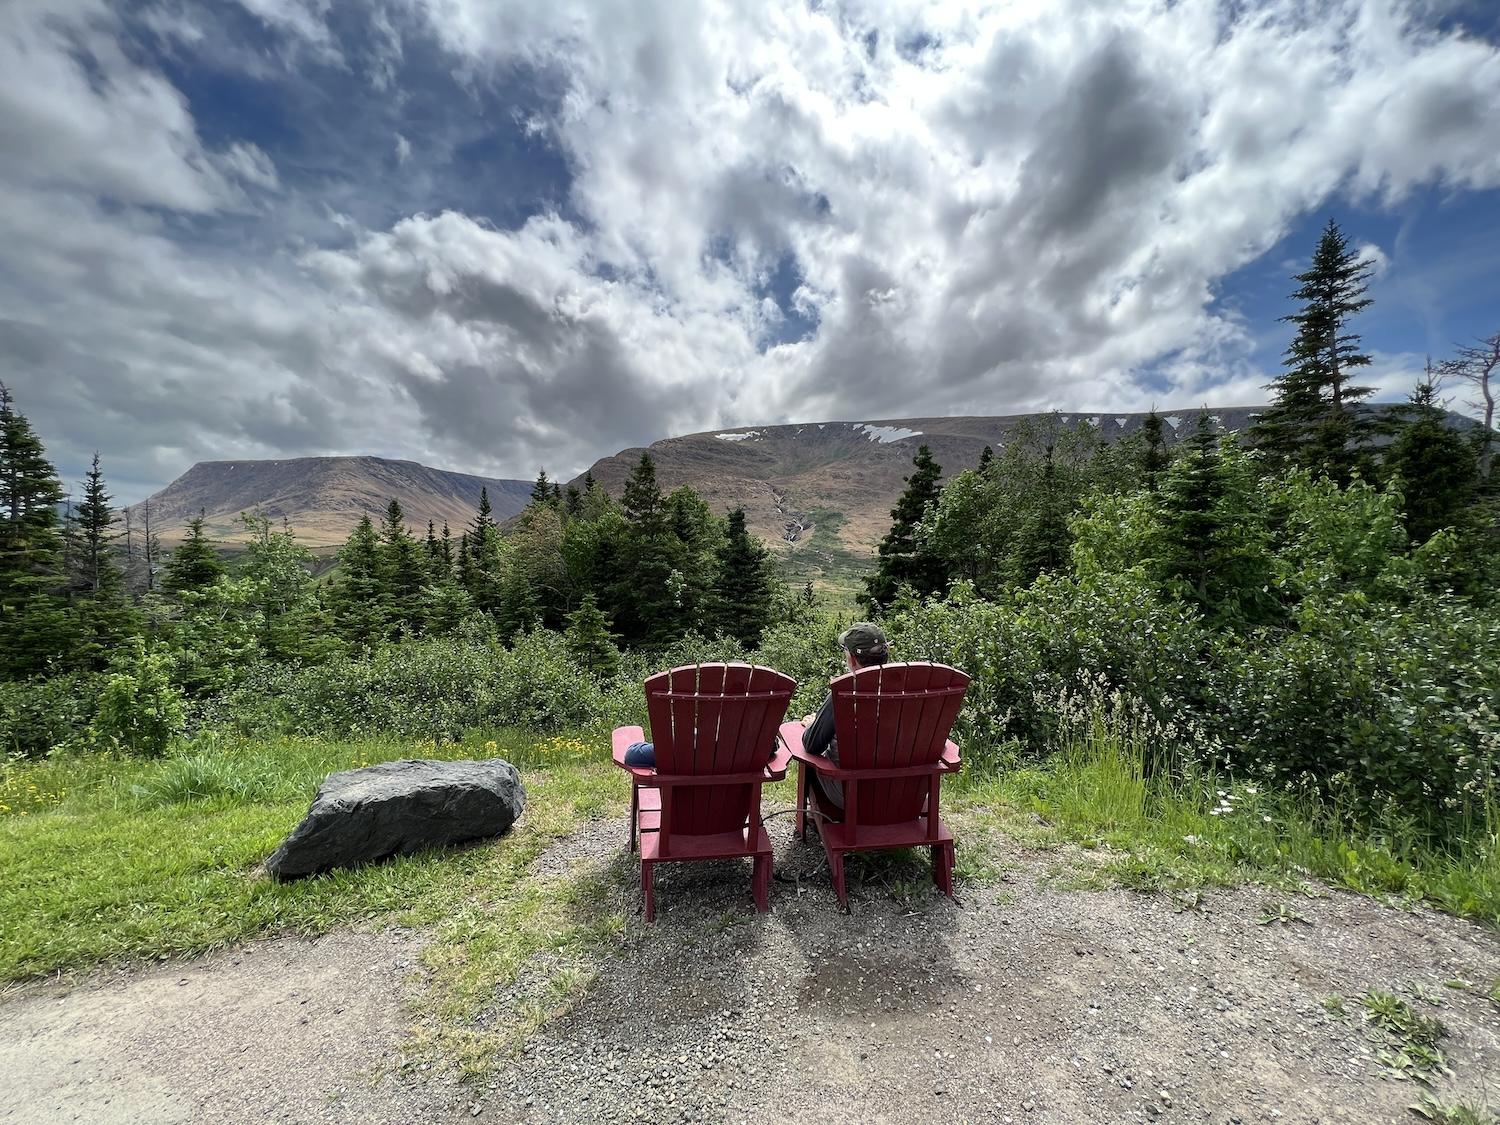 From two of Parks Canada's "Red Chairs," you can take in views of the Tablelands in Gros Morne National Park.